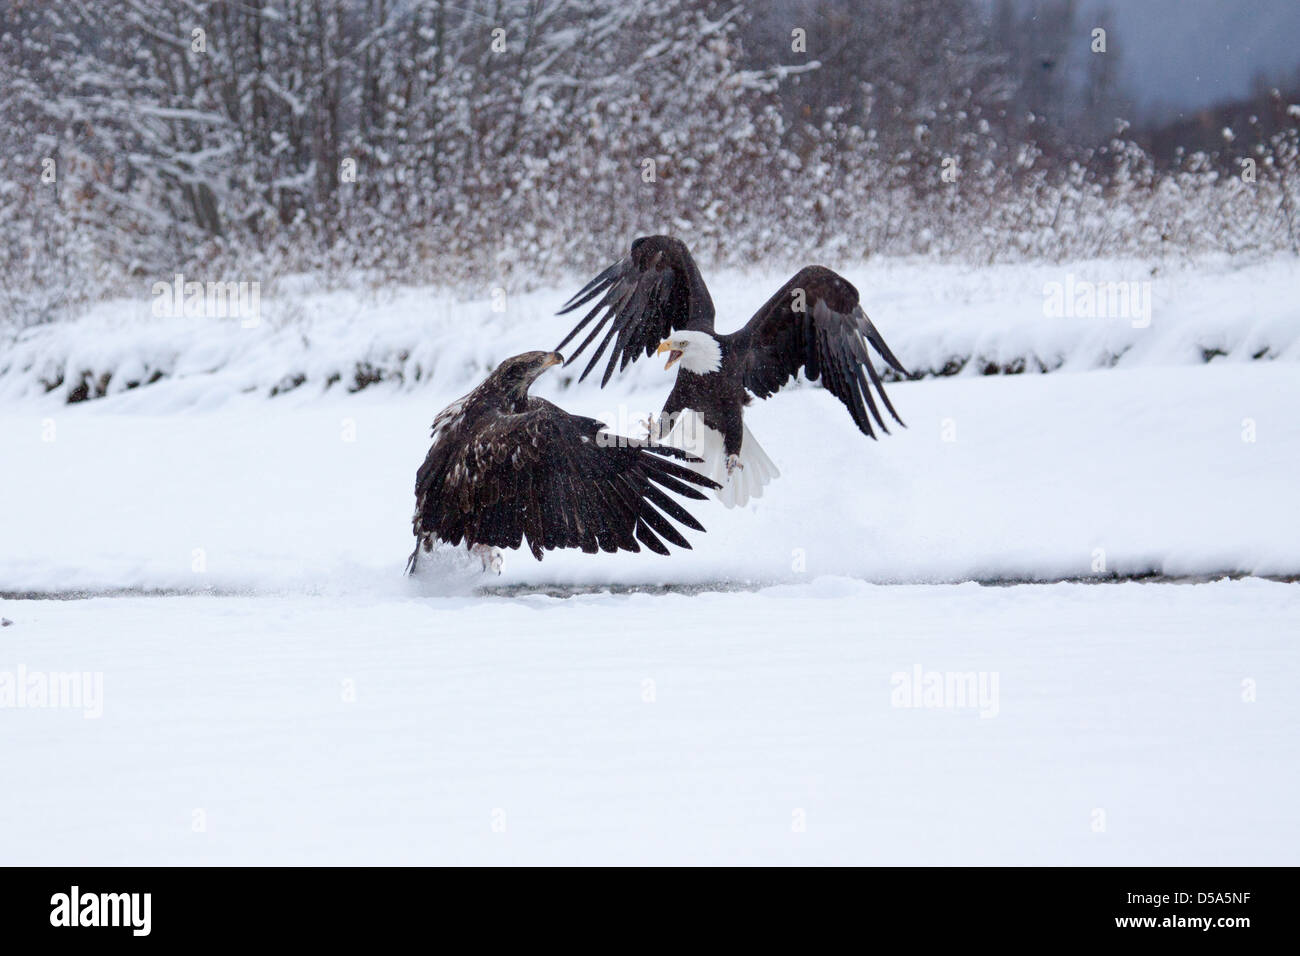 Two bald eagles fighting over salmon. Stock Photo